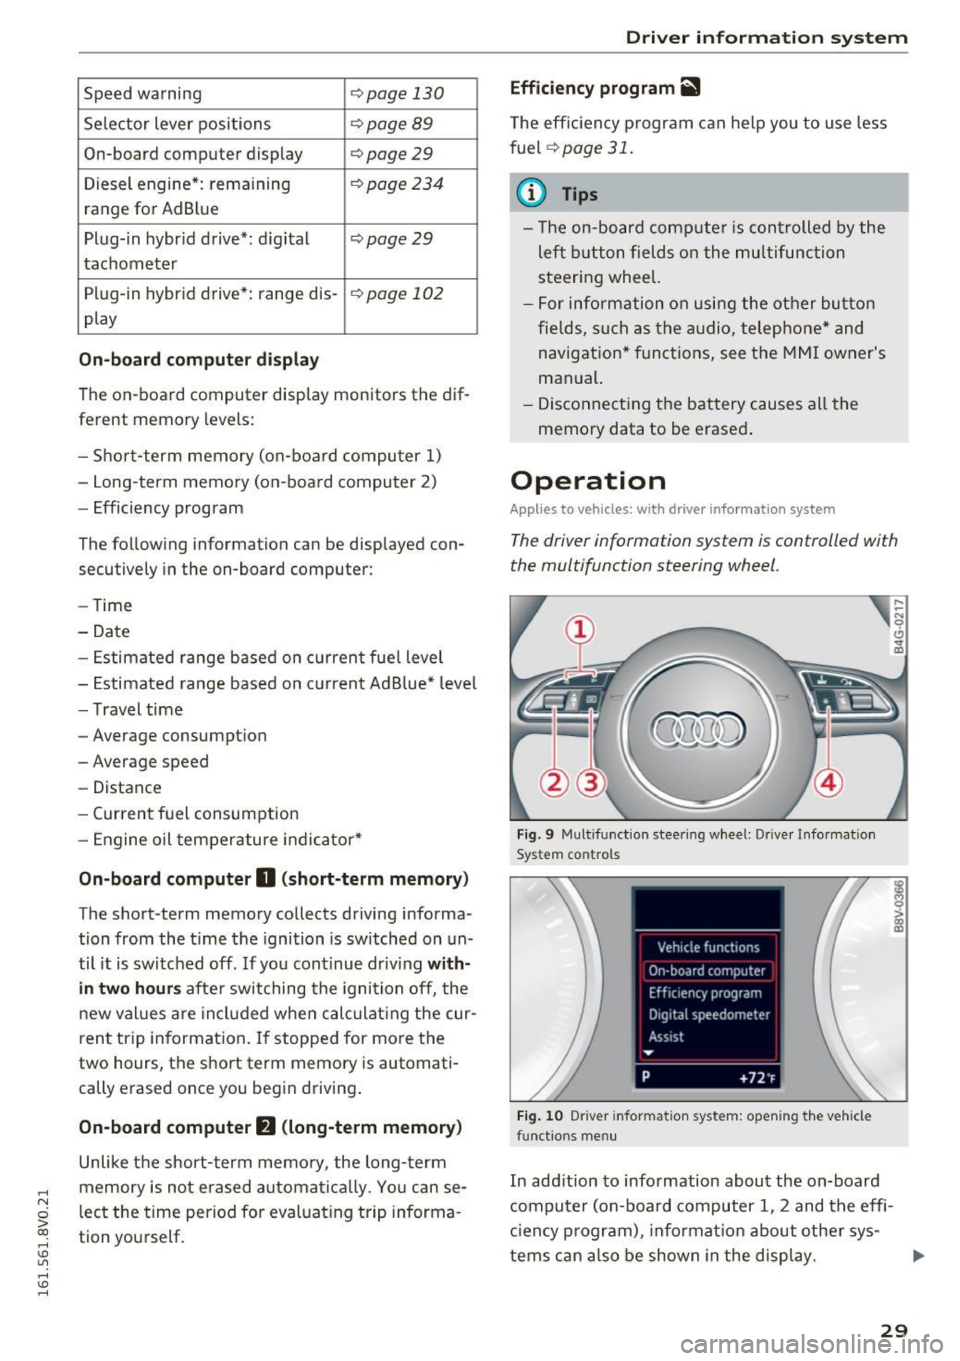 AUDI S3 2016 Owners Guide .... N 
0 > CX) 
rl I.Cl U"I 
rl I.Cl .... 
Speed  warning ¢page  130 
Selector  lever  positions C?page  89 
On-board  computer  display ¢page29 
Diesel  engine*:  remaining C?page 234 
range  for 